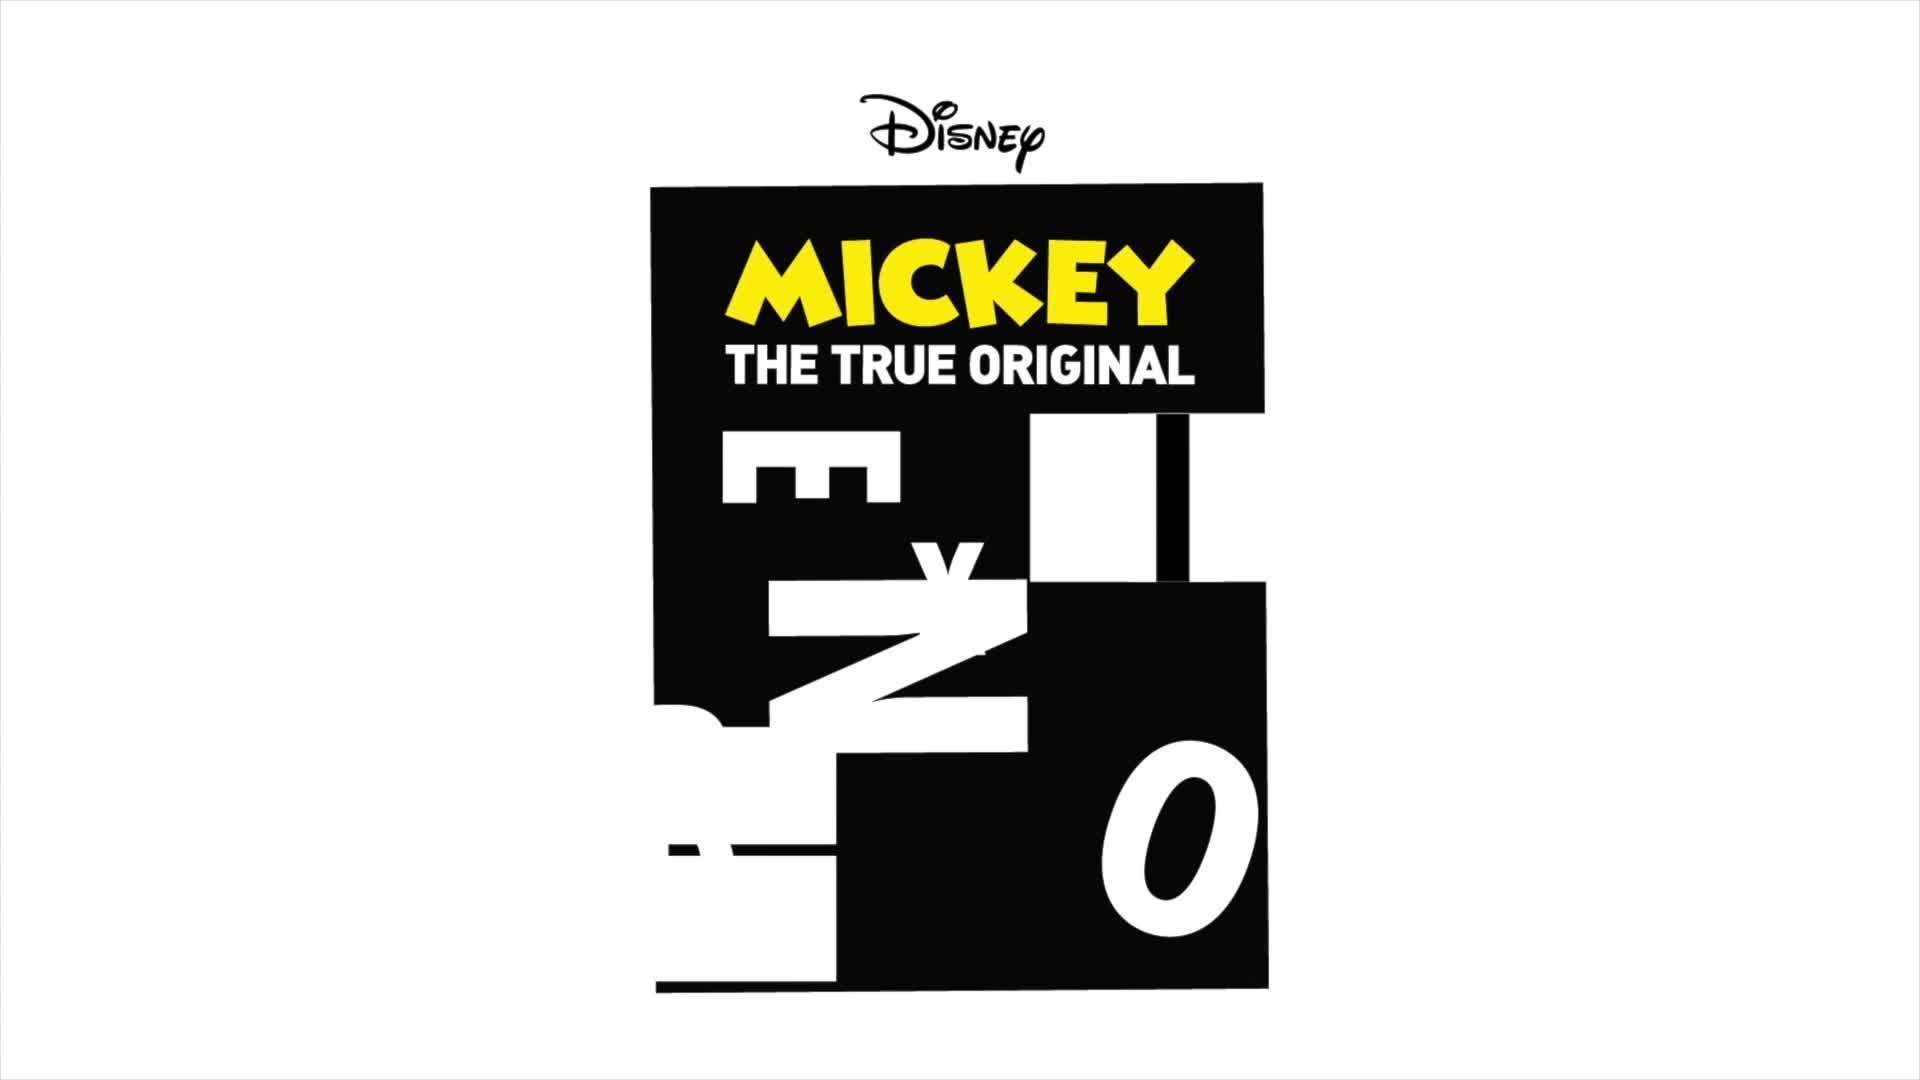 Celebrate Minnie Mouse at the Mickey: The True Original Exhibition